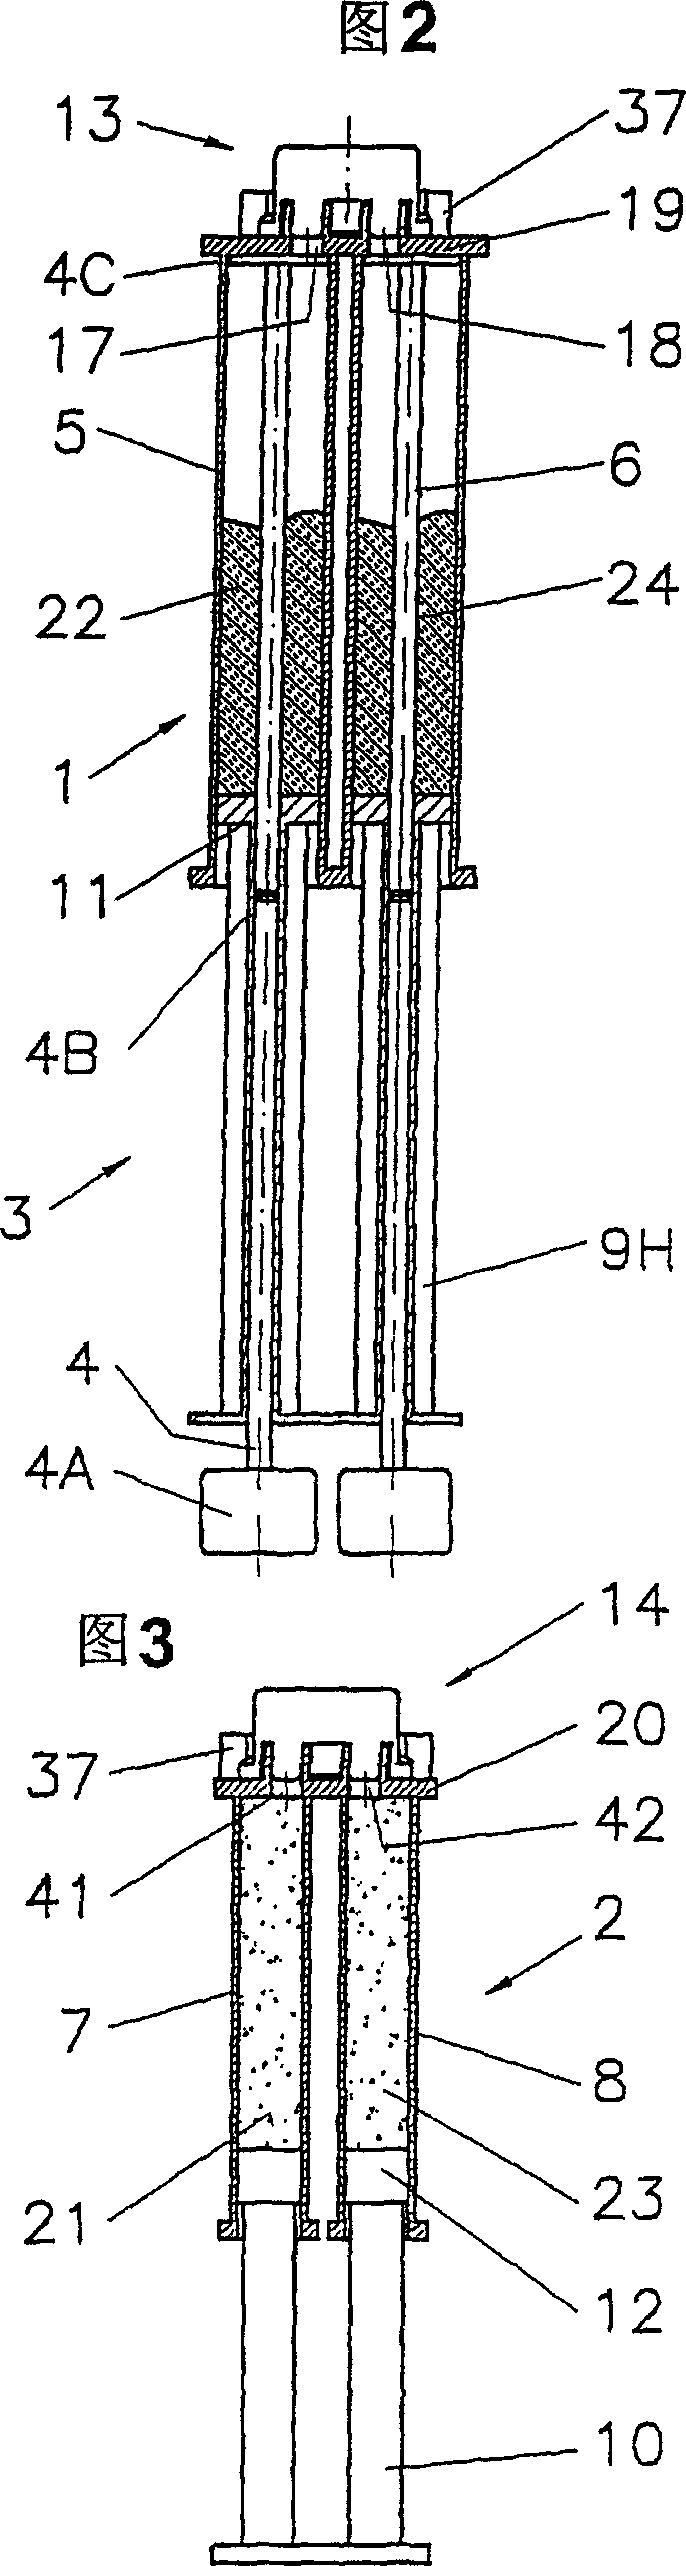 Device and method for transferring, mixing and delivering components